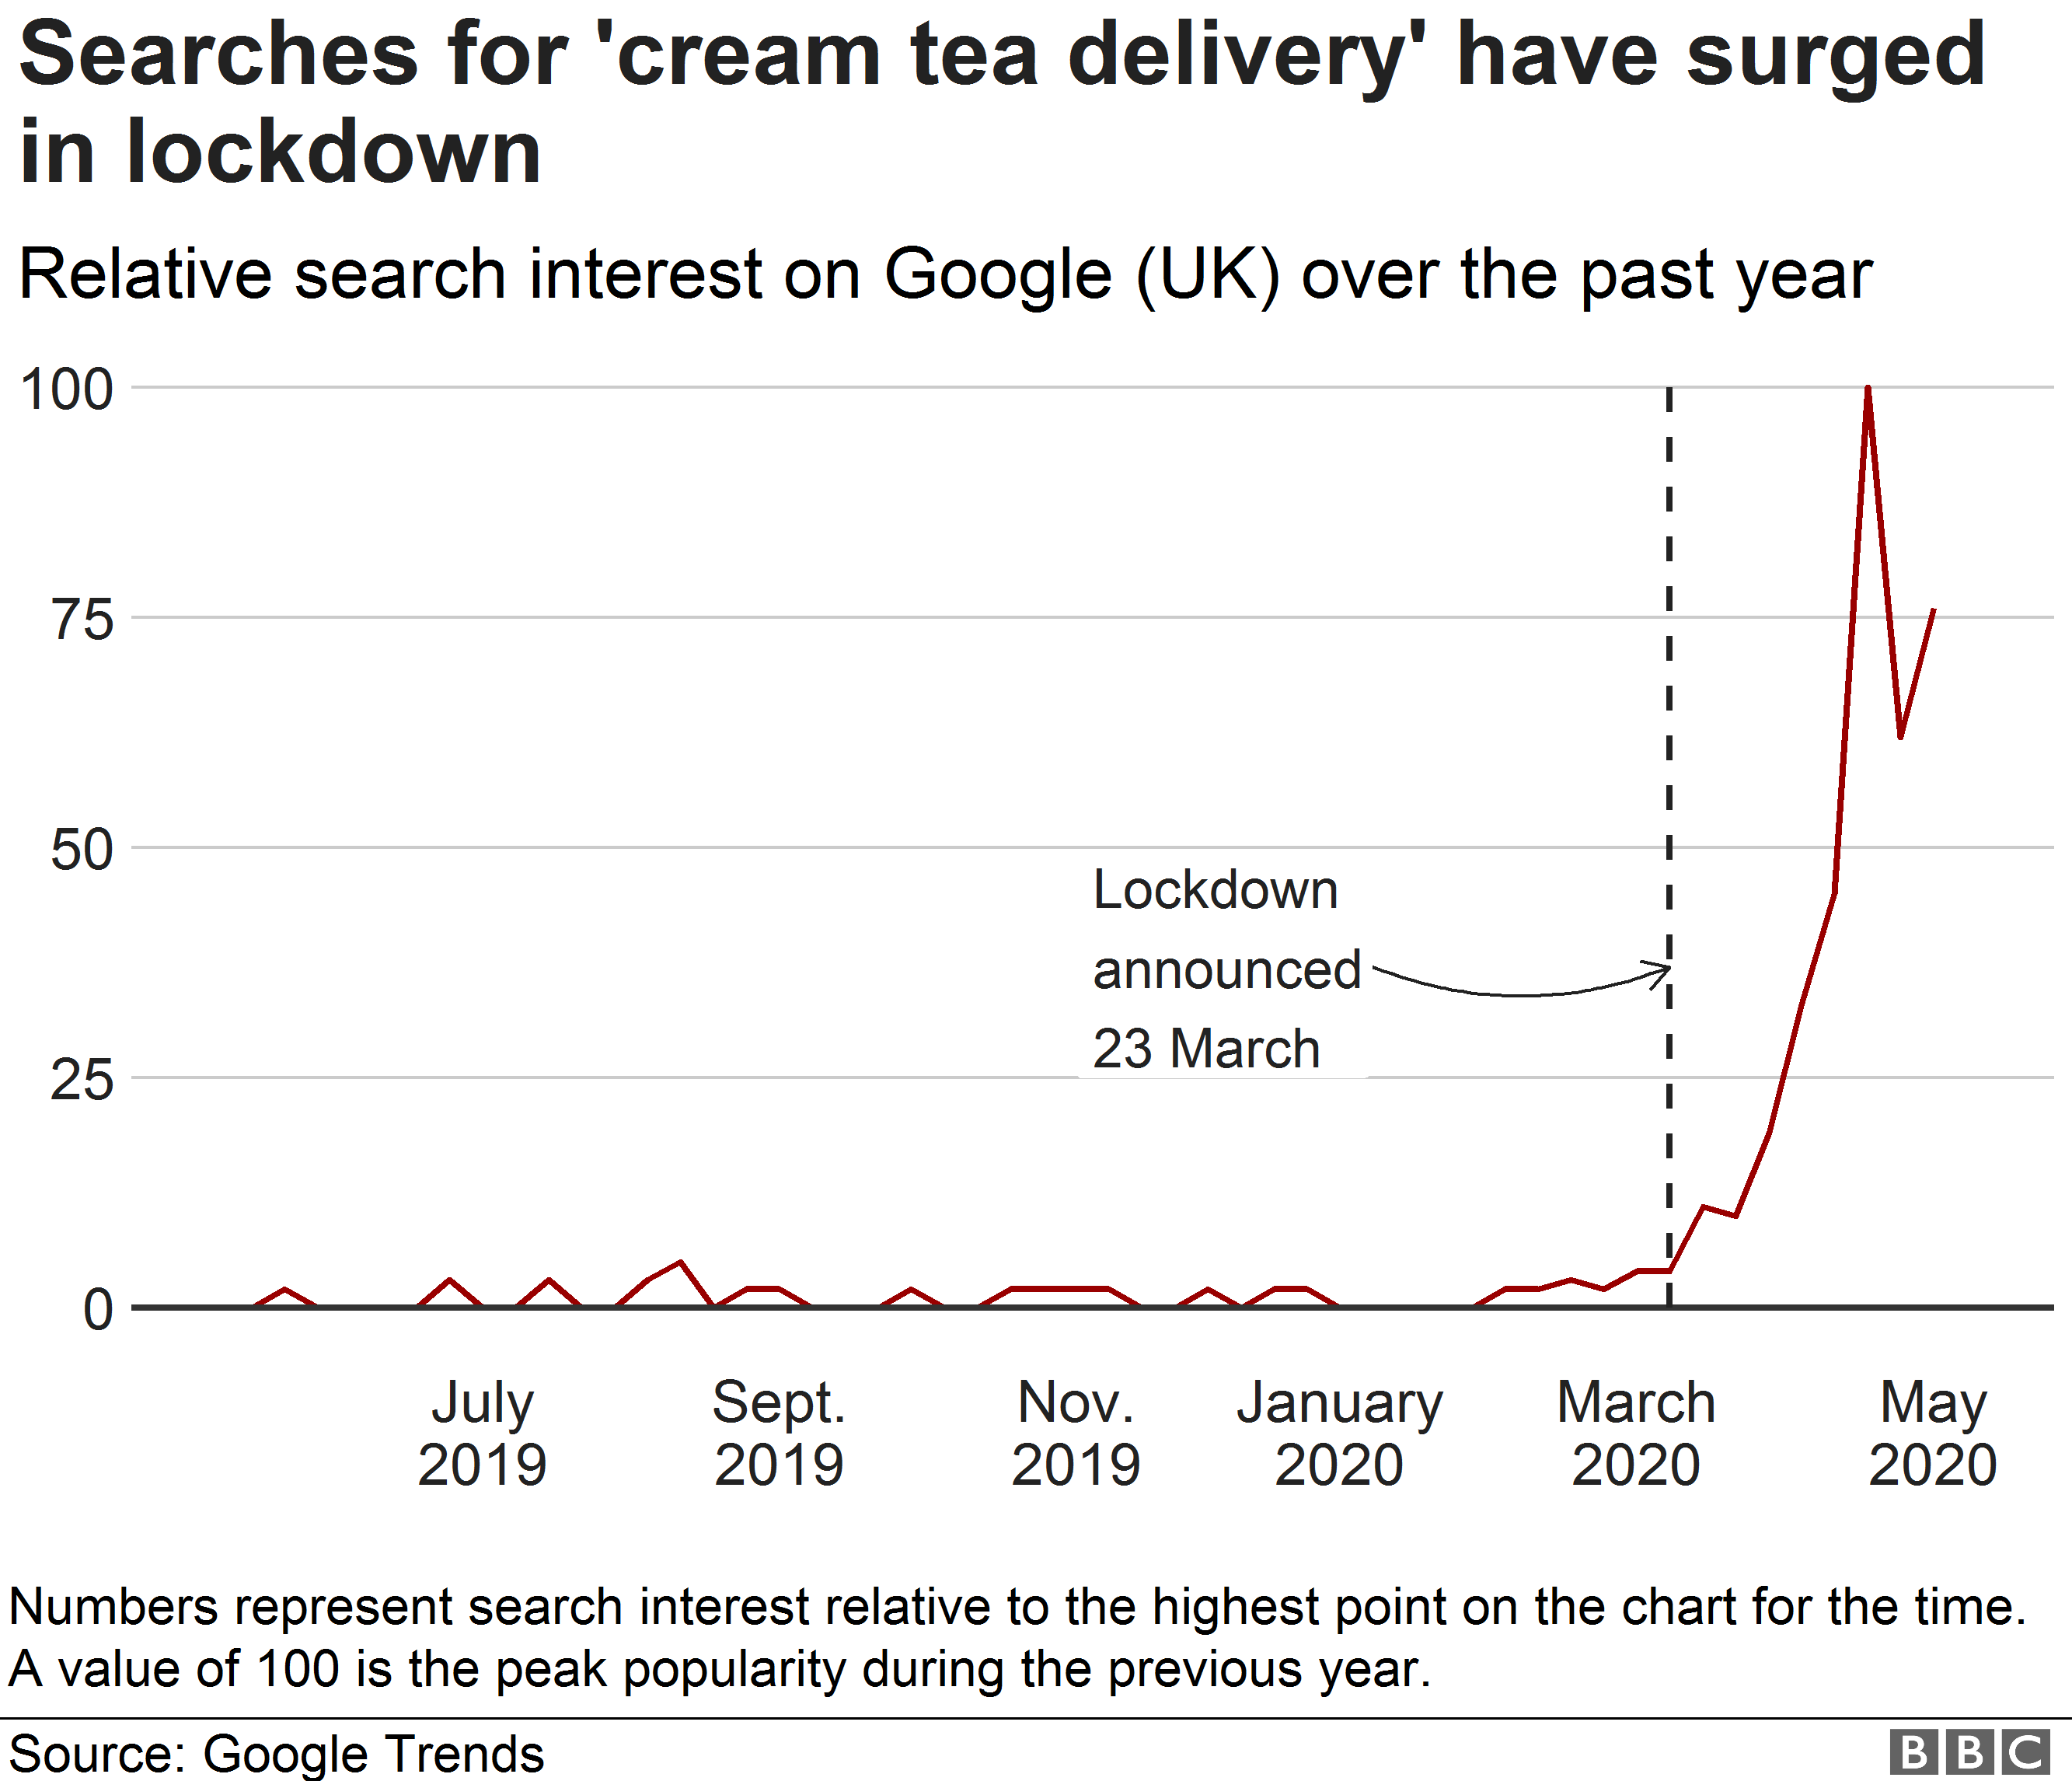 Chart showing the rise in relative search interest for cream teas to be delivered post lockdown